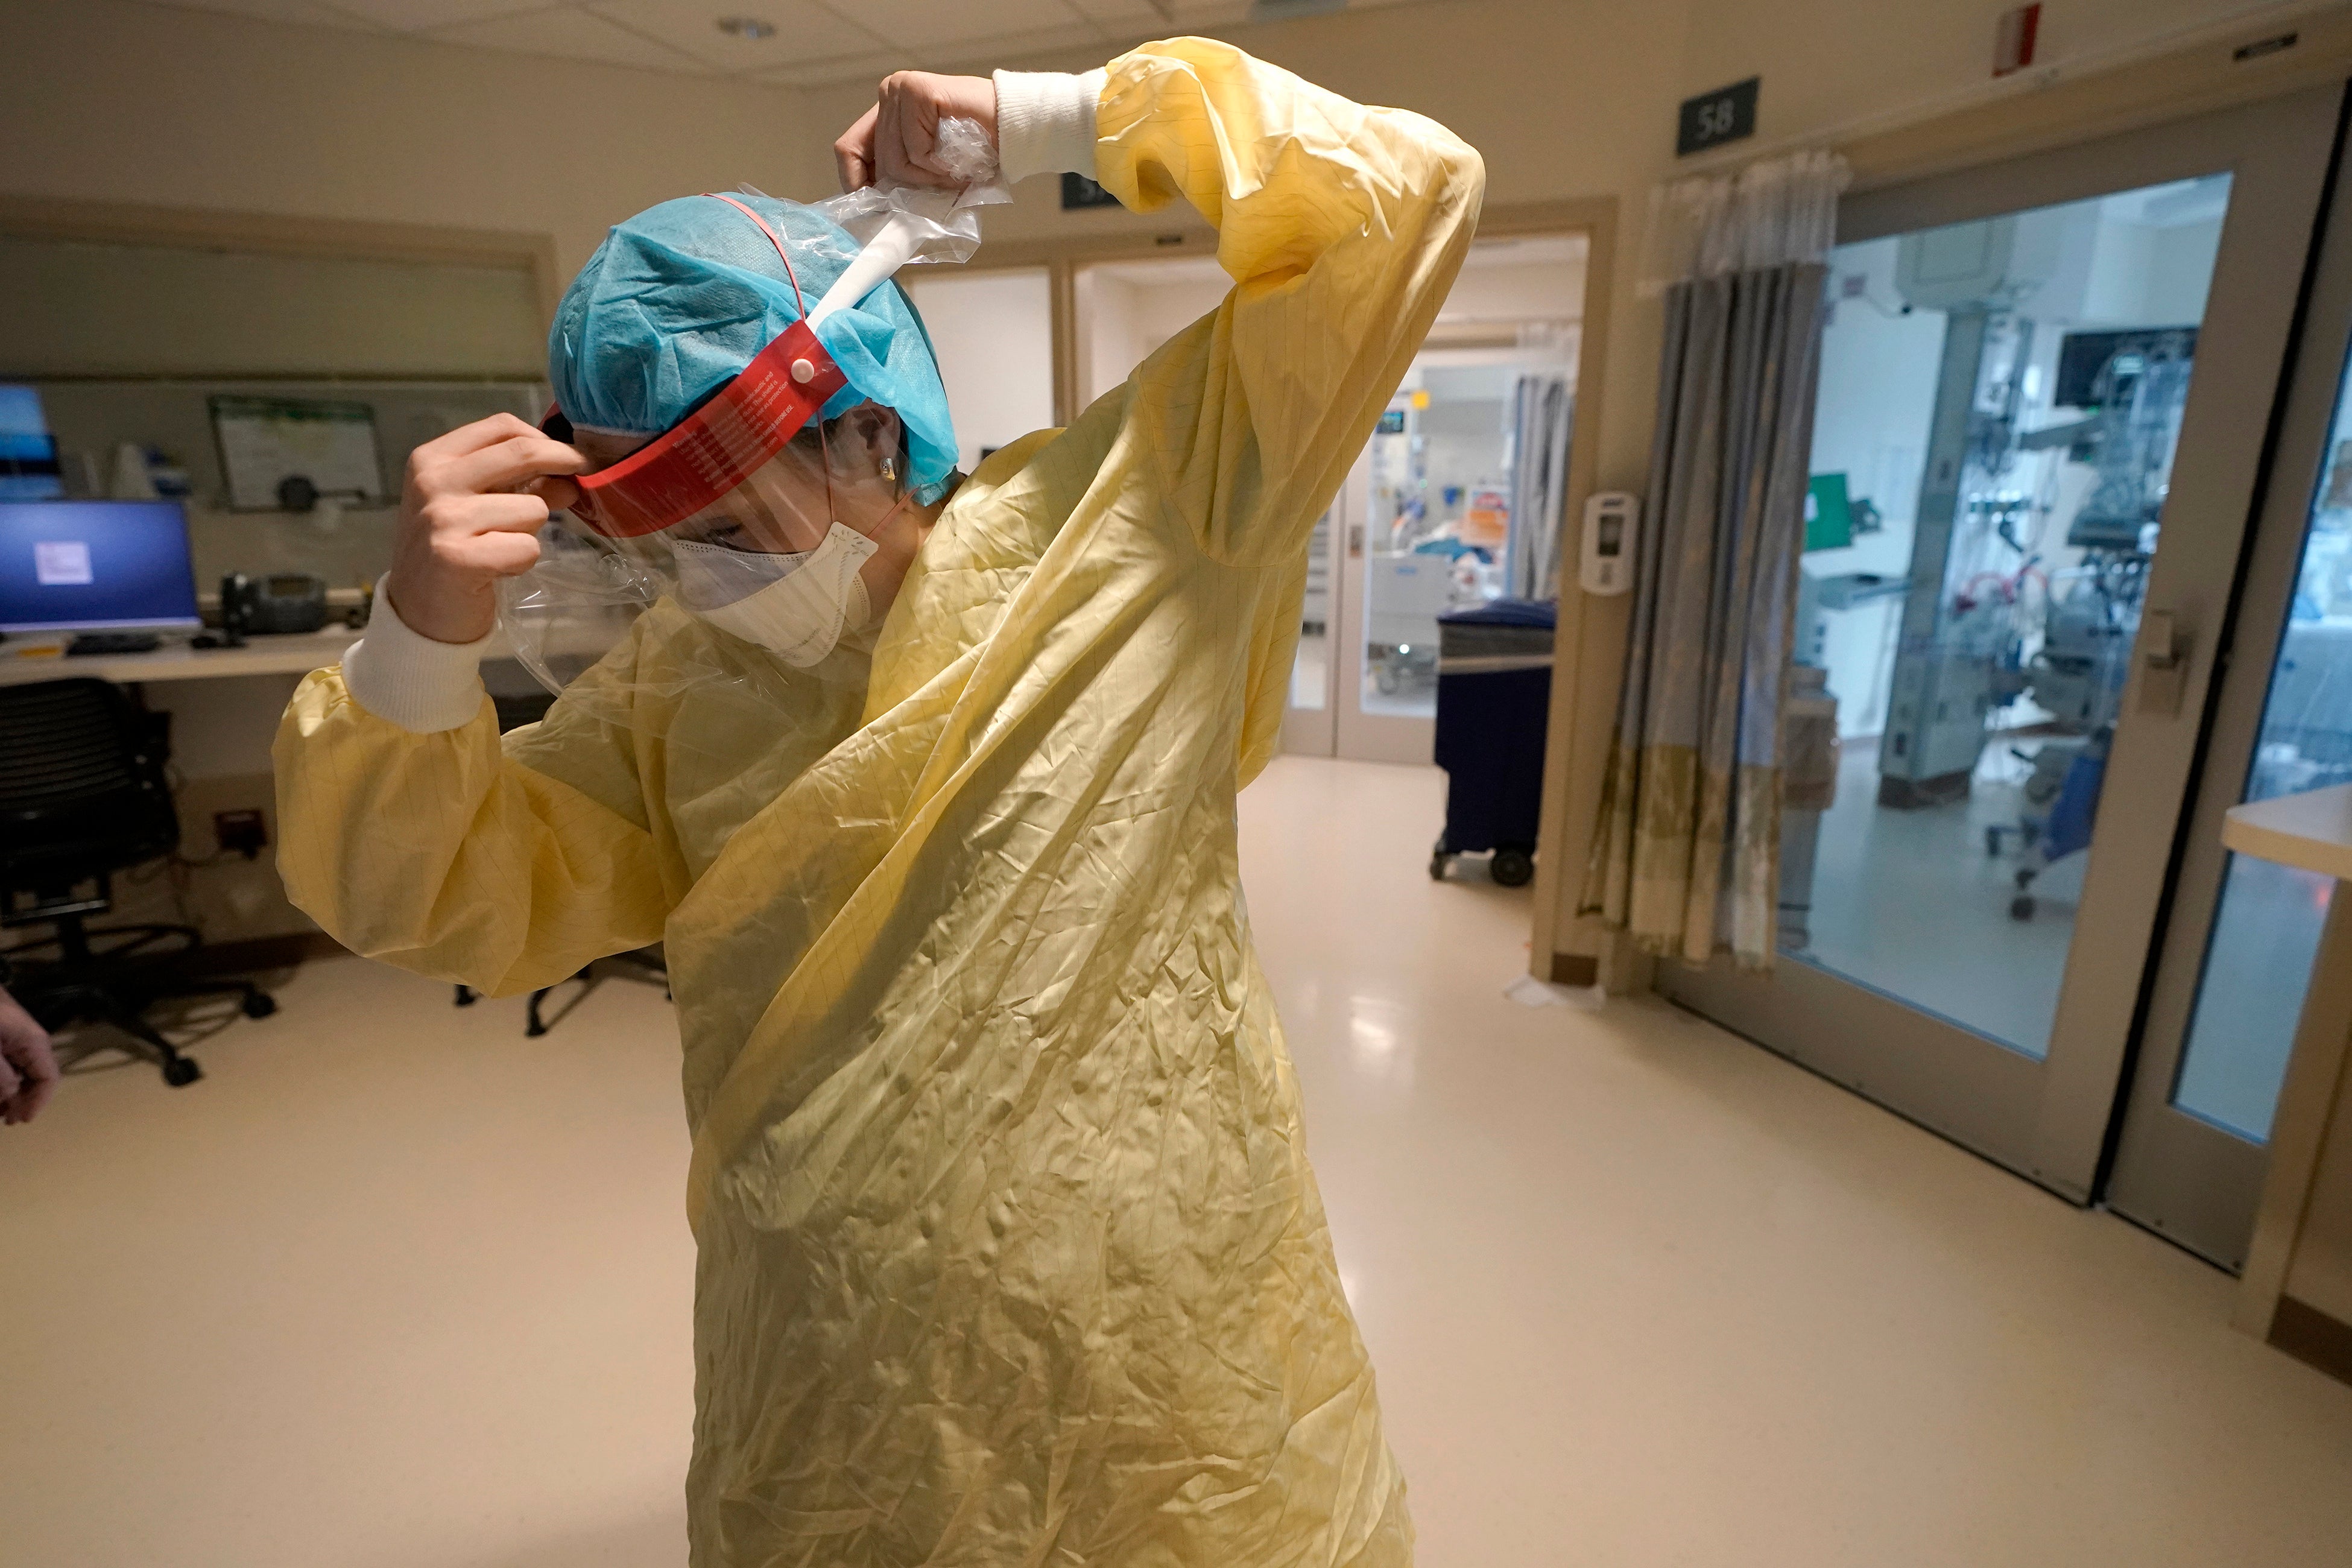 Registered nurse Sara Nystrom prepares to enter a patient’s room in the Covid-19 Intensive Care Unit at Dartmouth-Hitchcock Medical Centre, in Lebanon, New Hampshire, on 3 January 2022